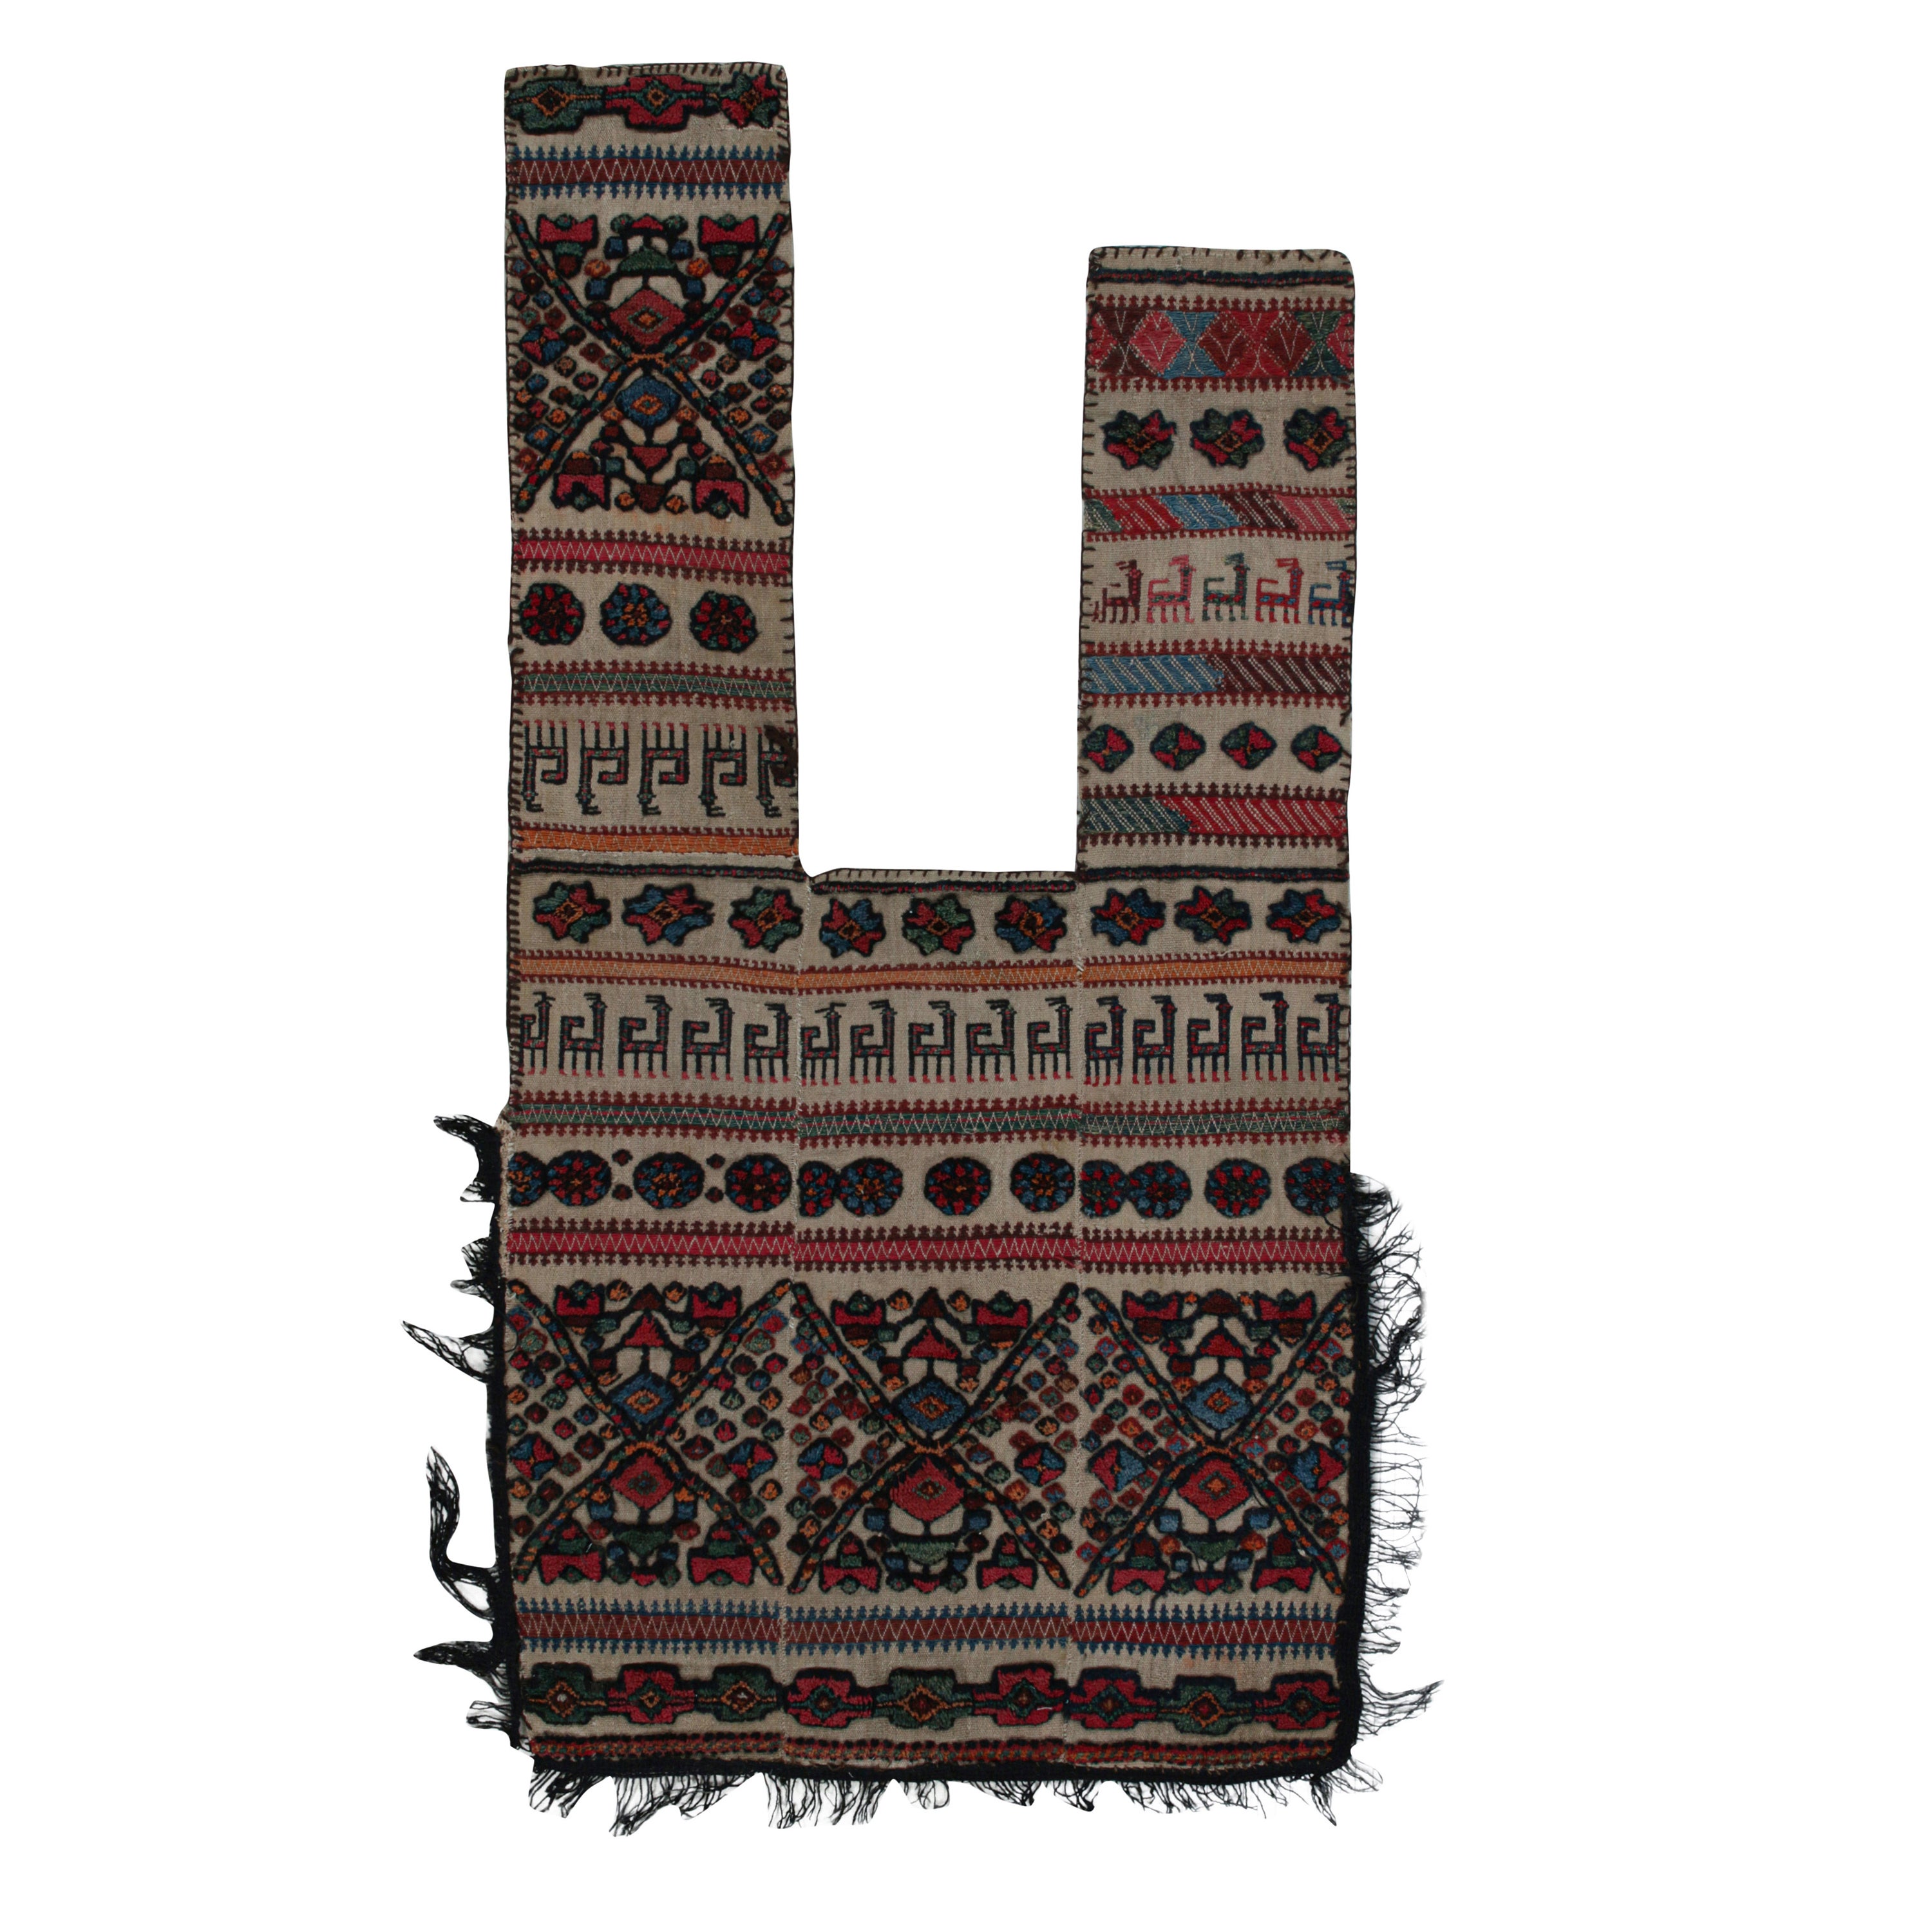 Antique Persian Horse Cover with Colorful Geometric Patterns, from Rug & Kilim For Sale